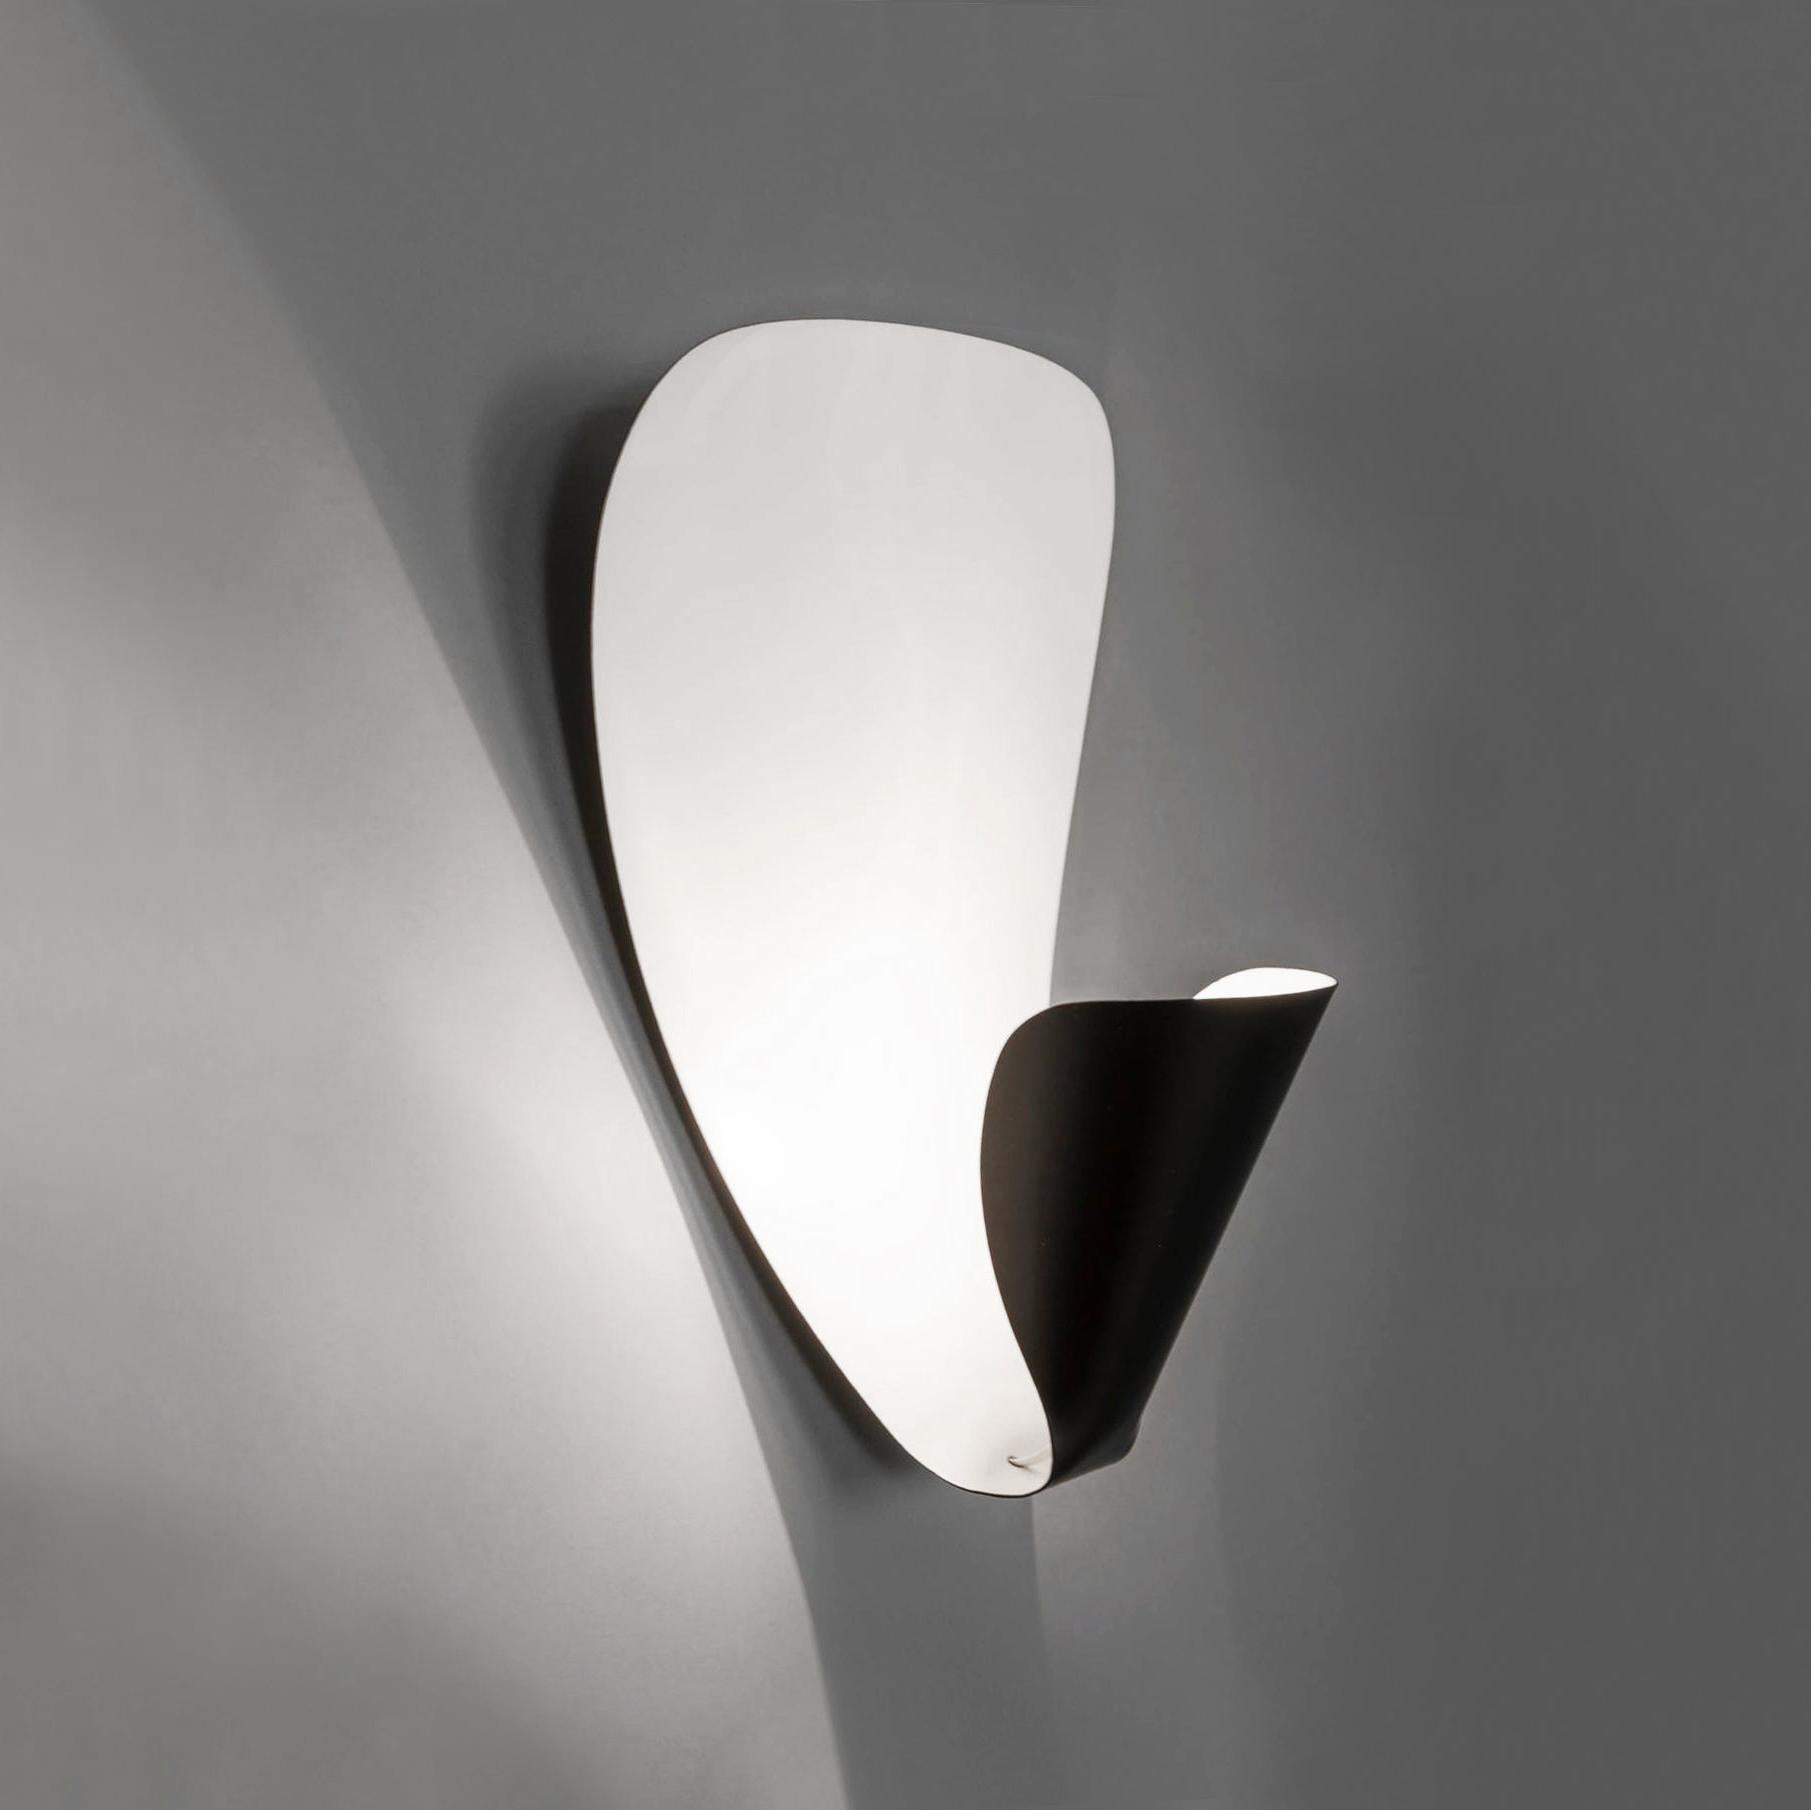 Wall sconce lamp model 'B206' designed by Michel Buffet in 1953.

The production of this re-edition lamps, wall lights and floor lamps are manufactured using craftsman’s techniques with the same materials and techniques as the first models. Each